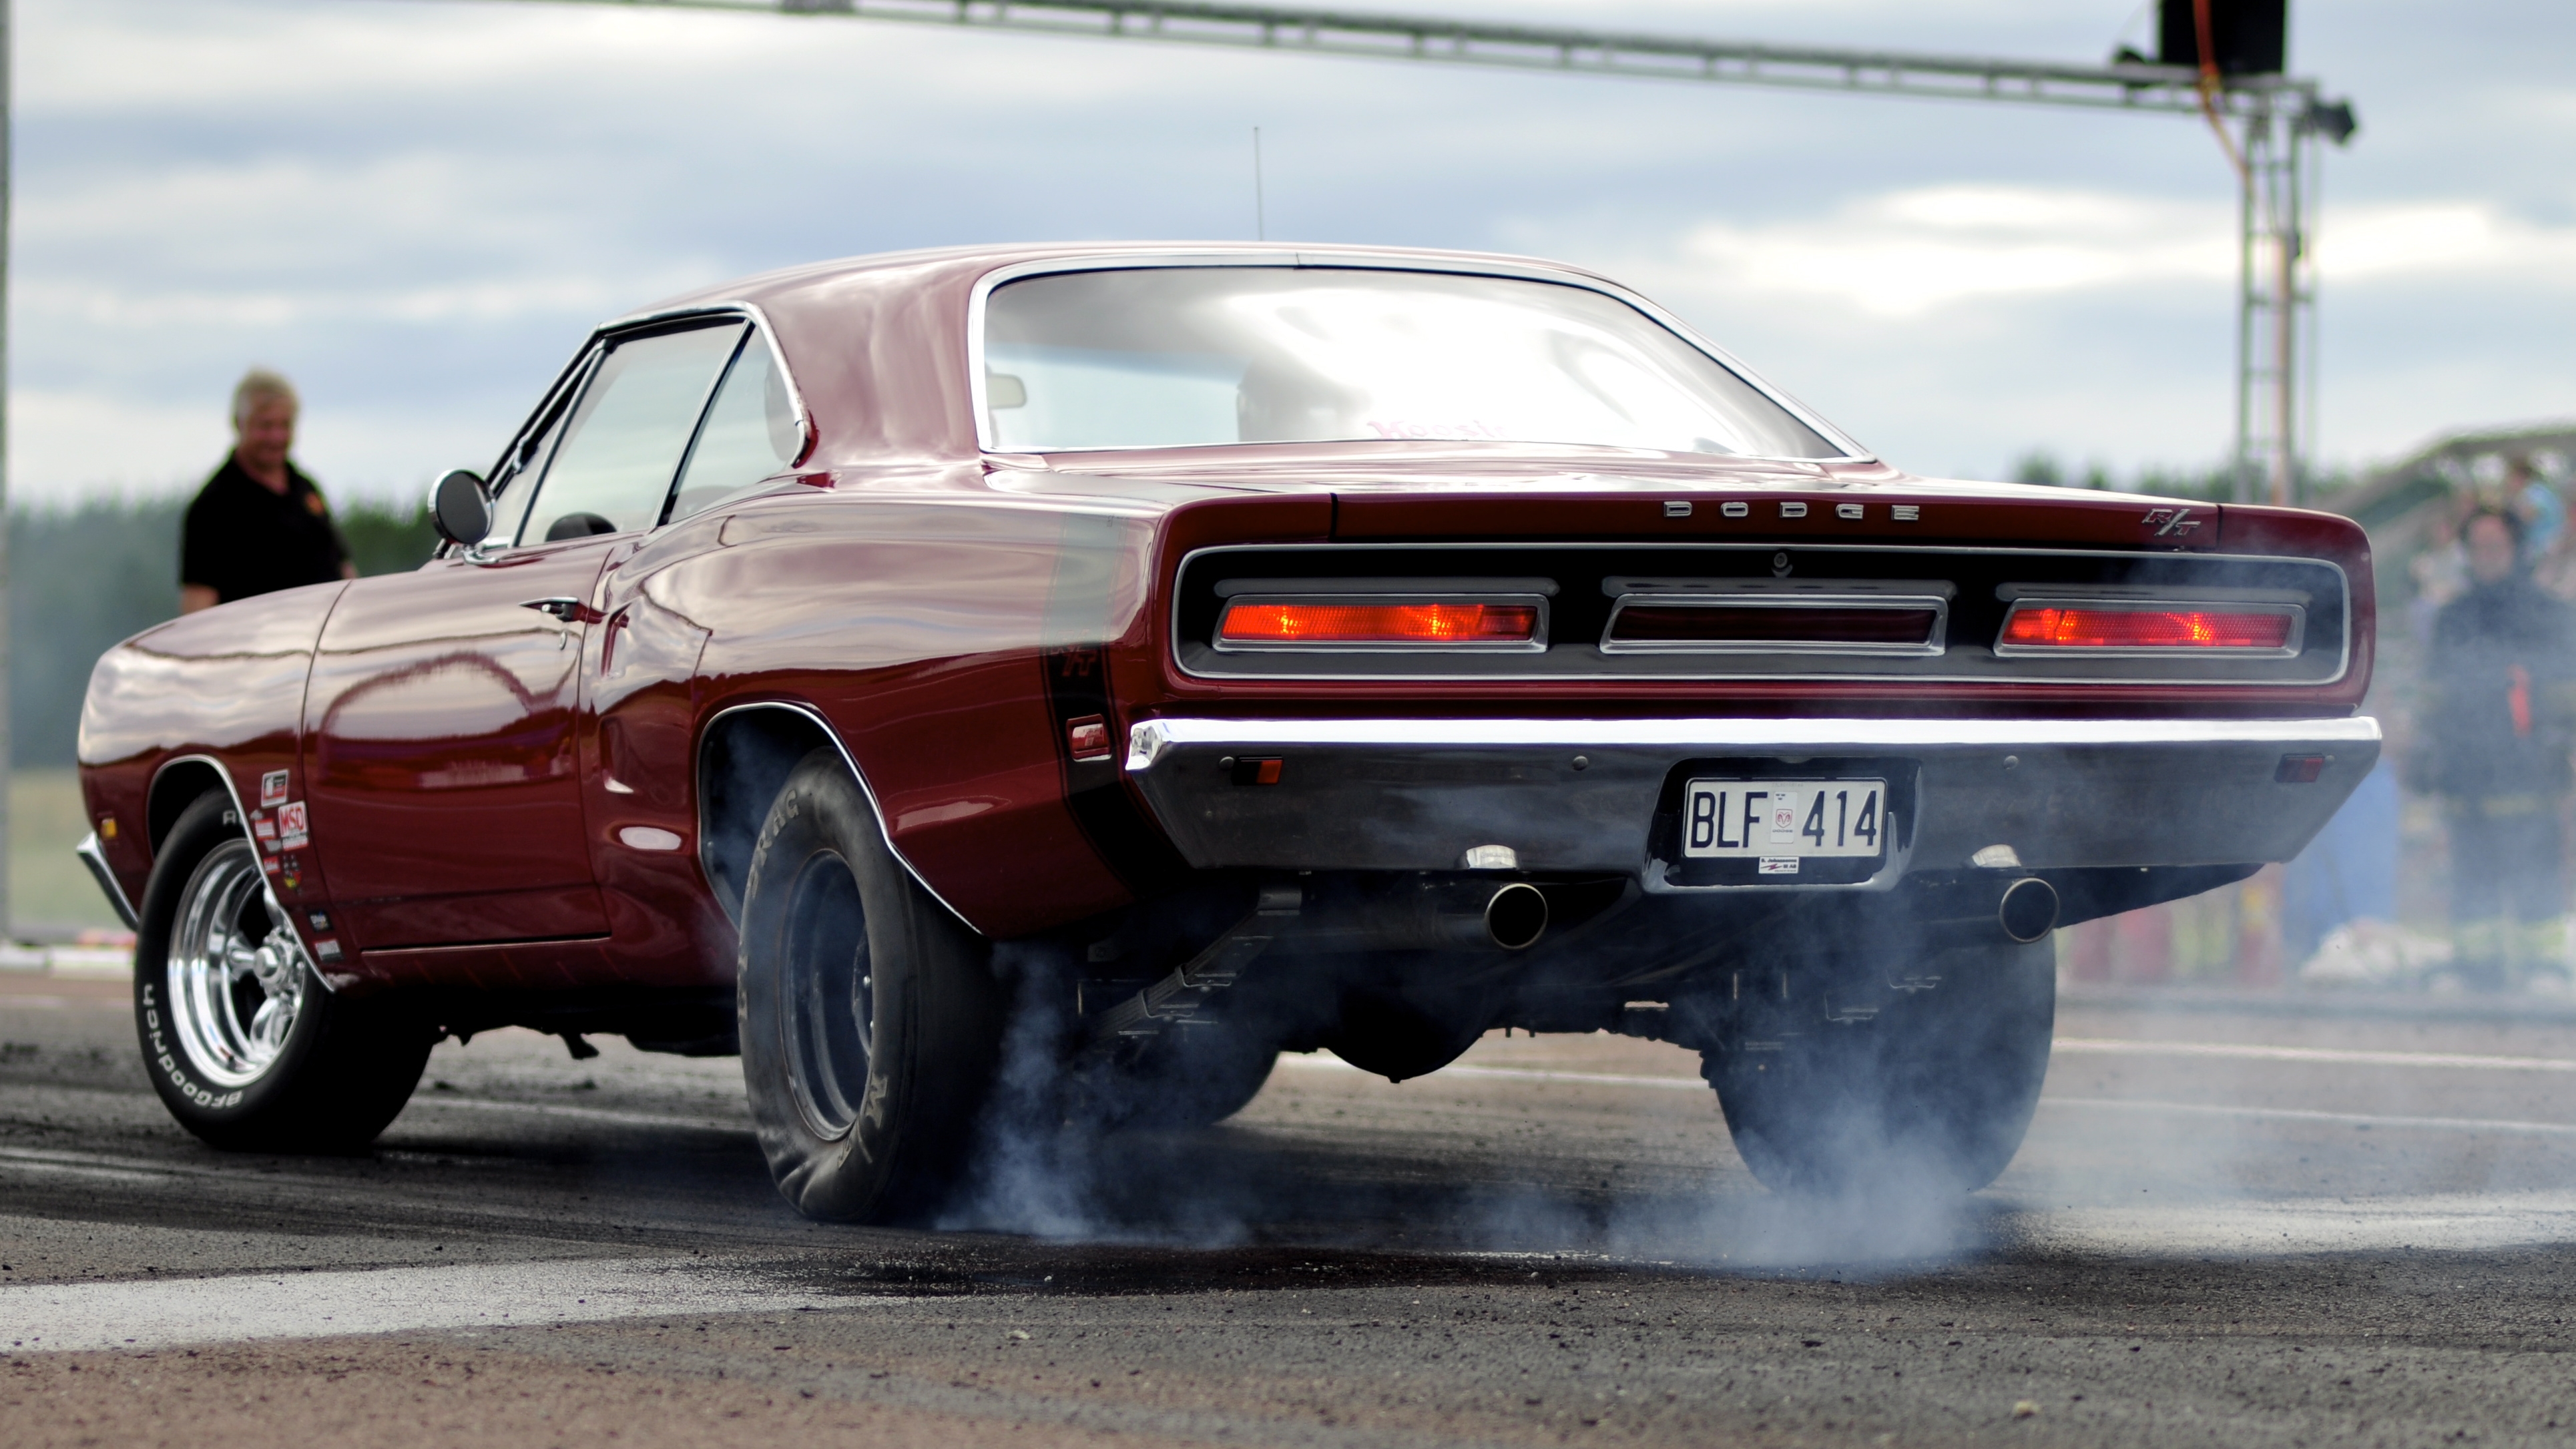 Vehicles Dodge Charger 3859x2171